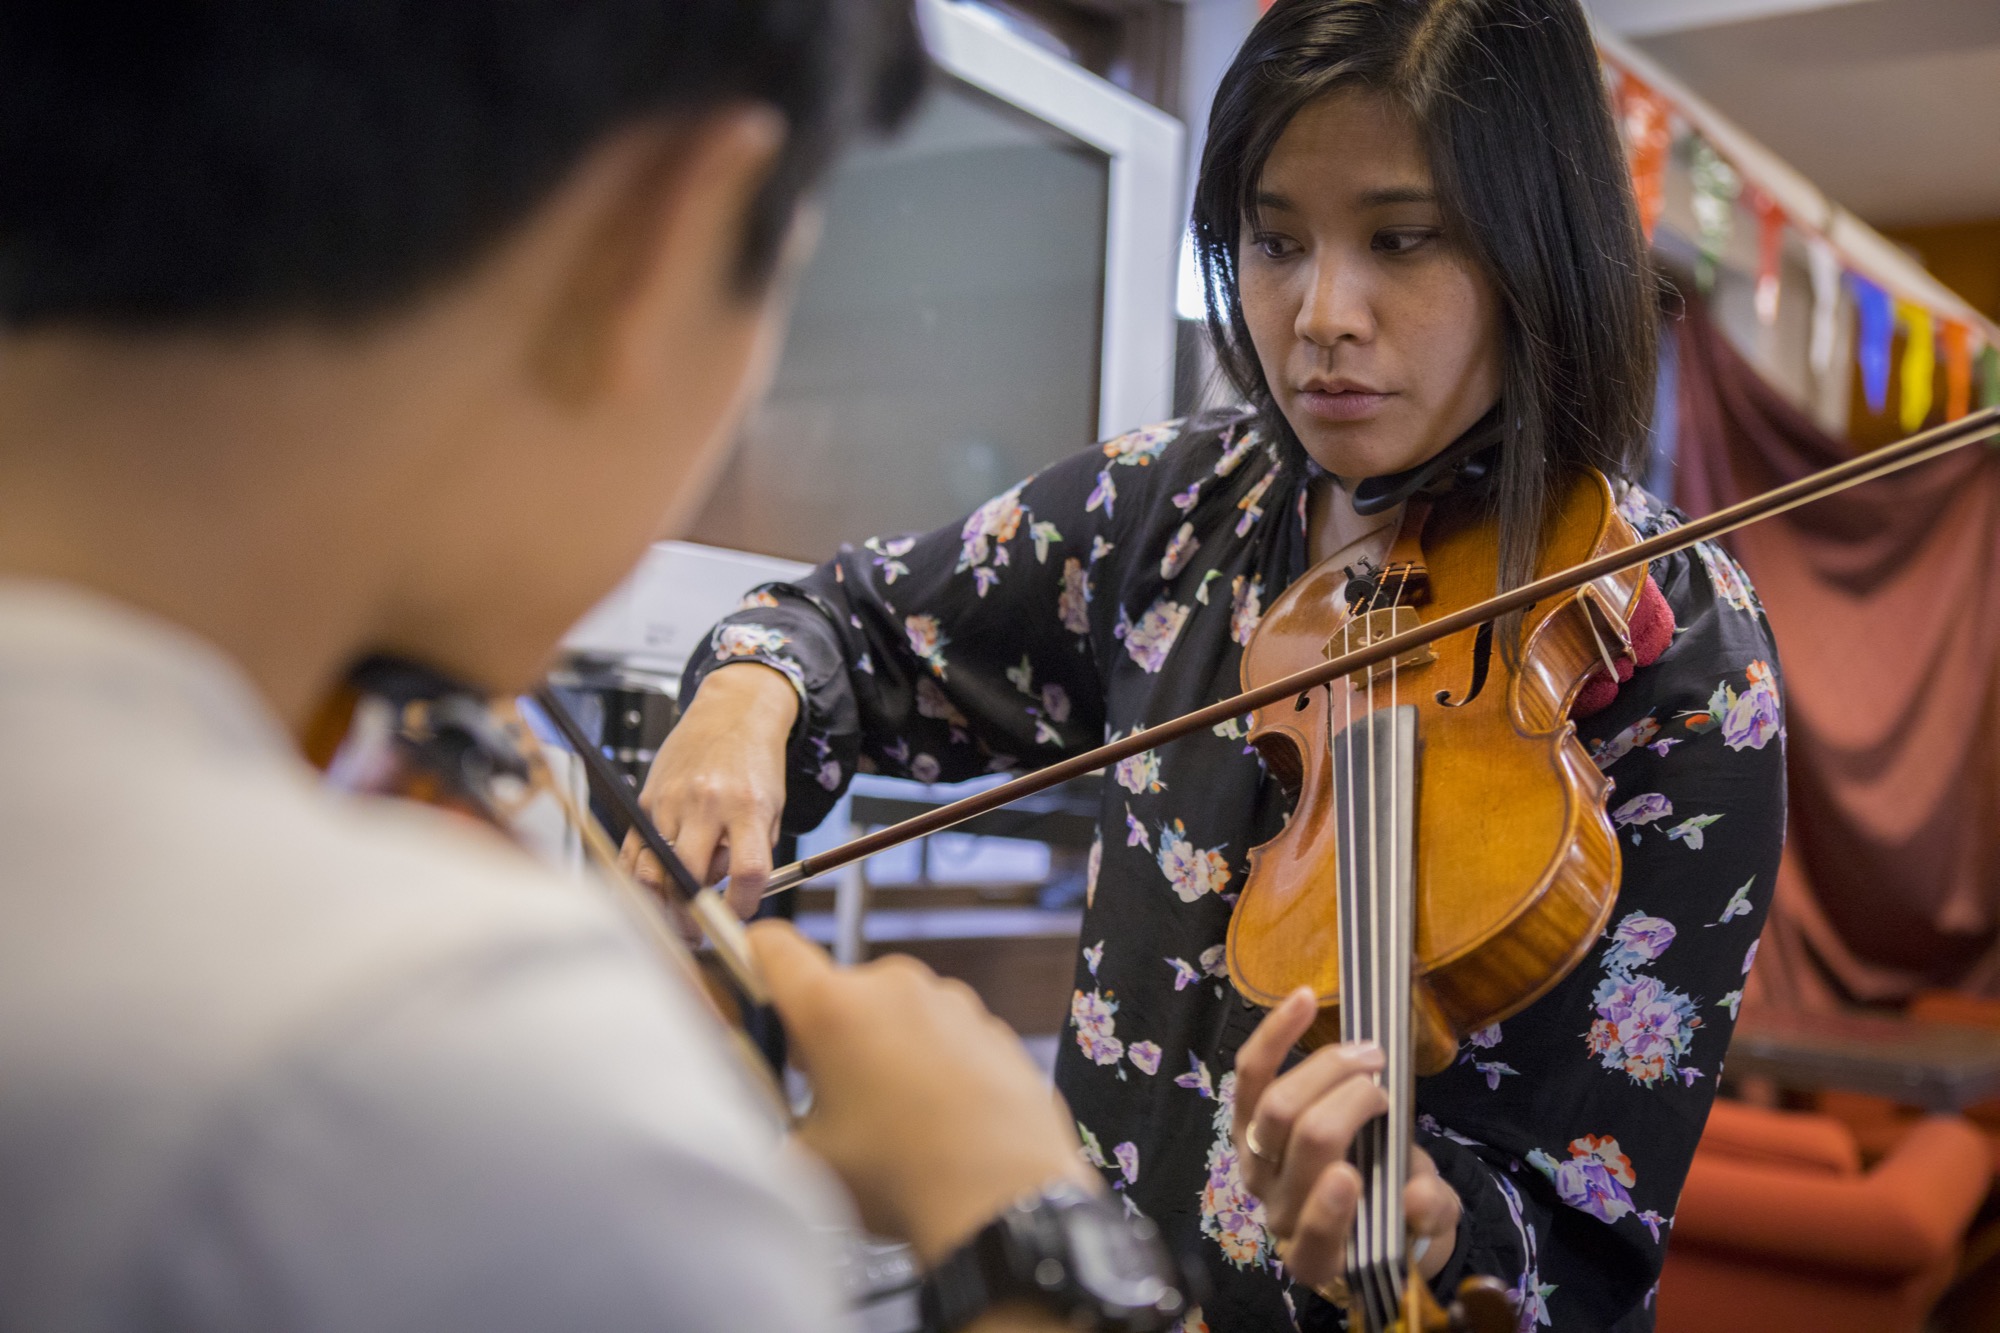 Yuki Numata Resnick is a co-founder of Buffalo String Works, an organization that provides music lessons to immigrant and refugee children in Buffalo, NY.